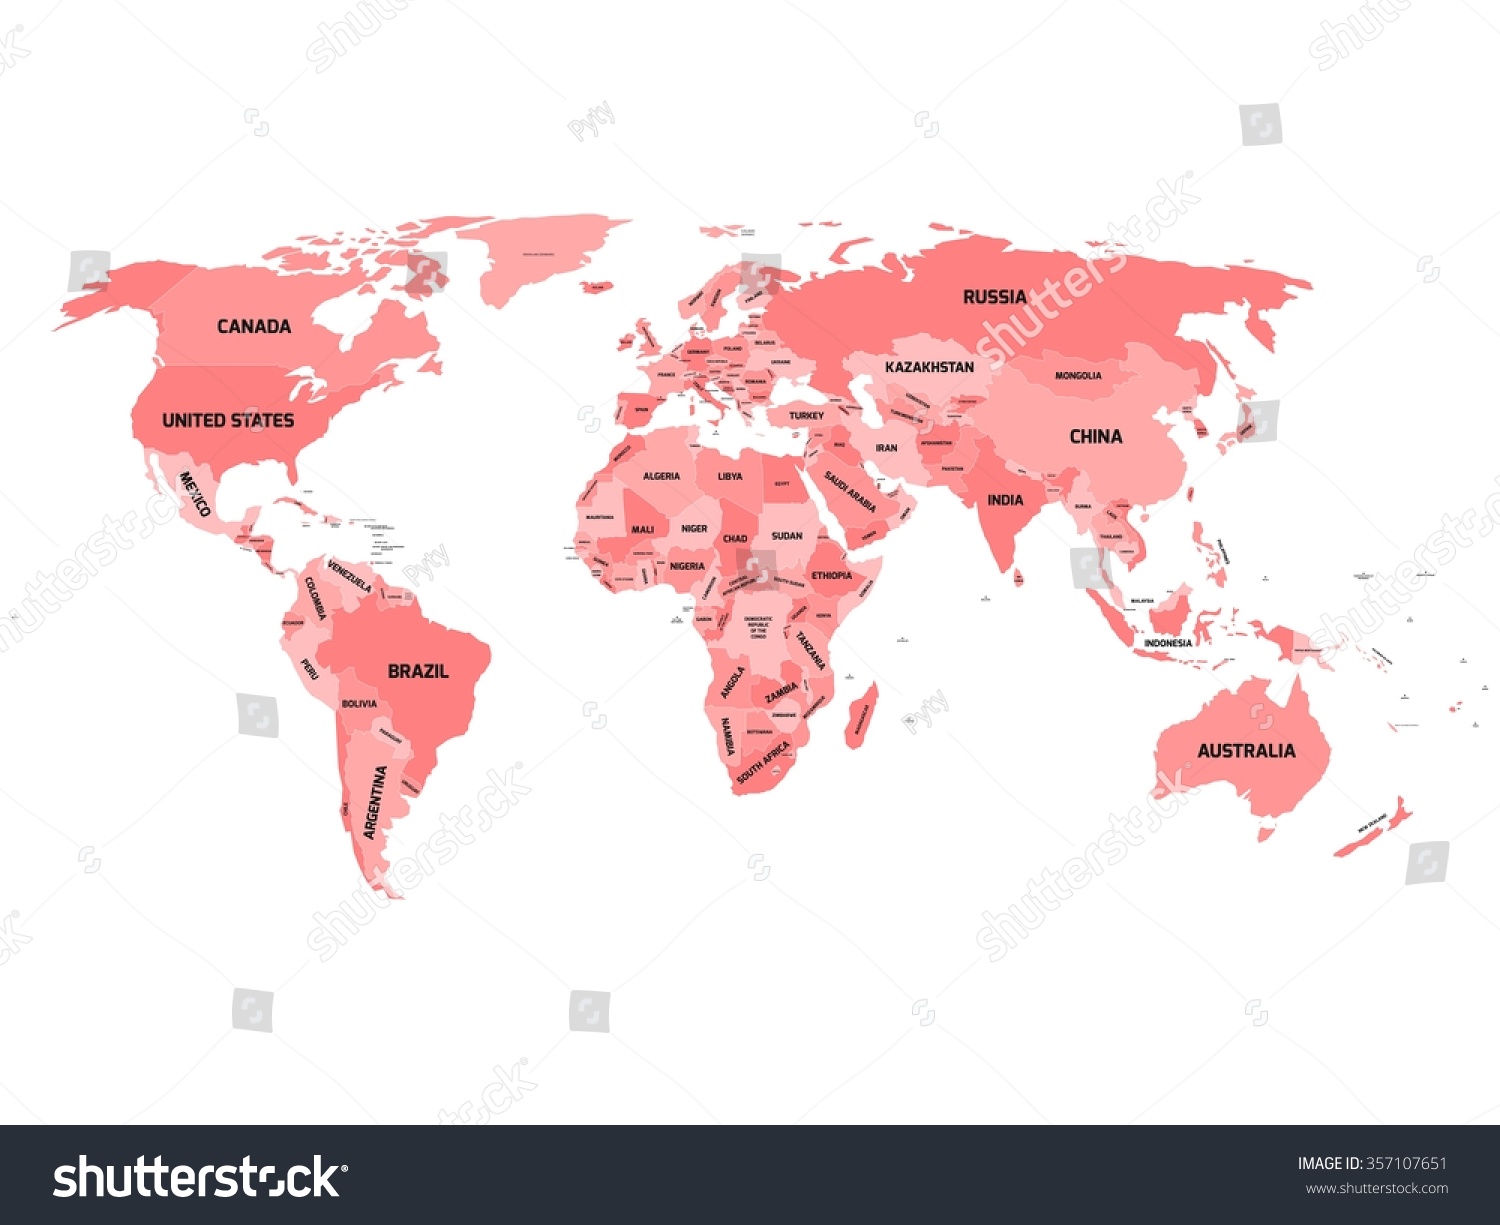 World Map Names Sovereign Countries Larger Stock Vector Royalty Free 357107651 7833